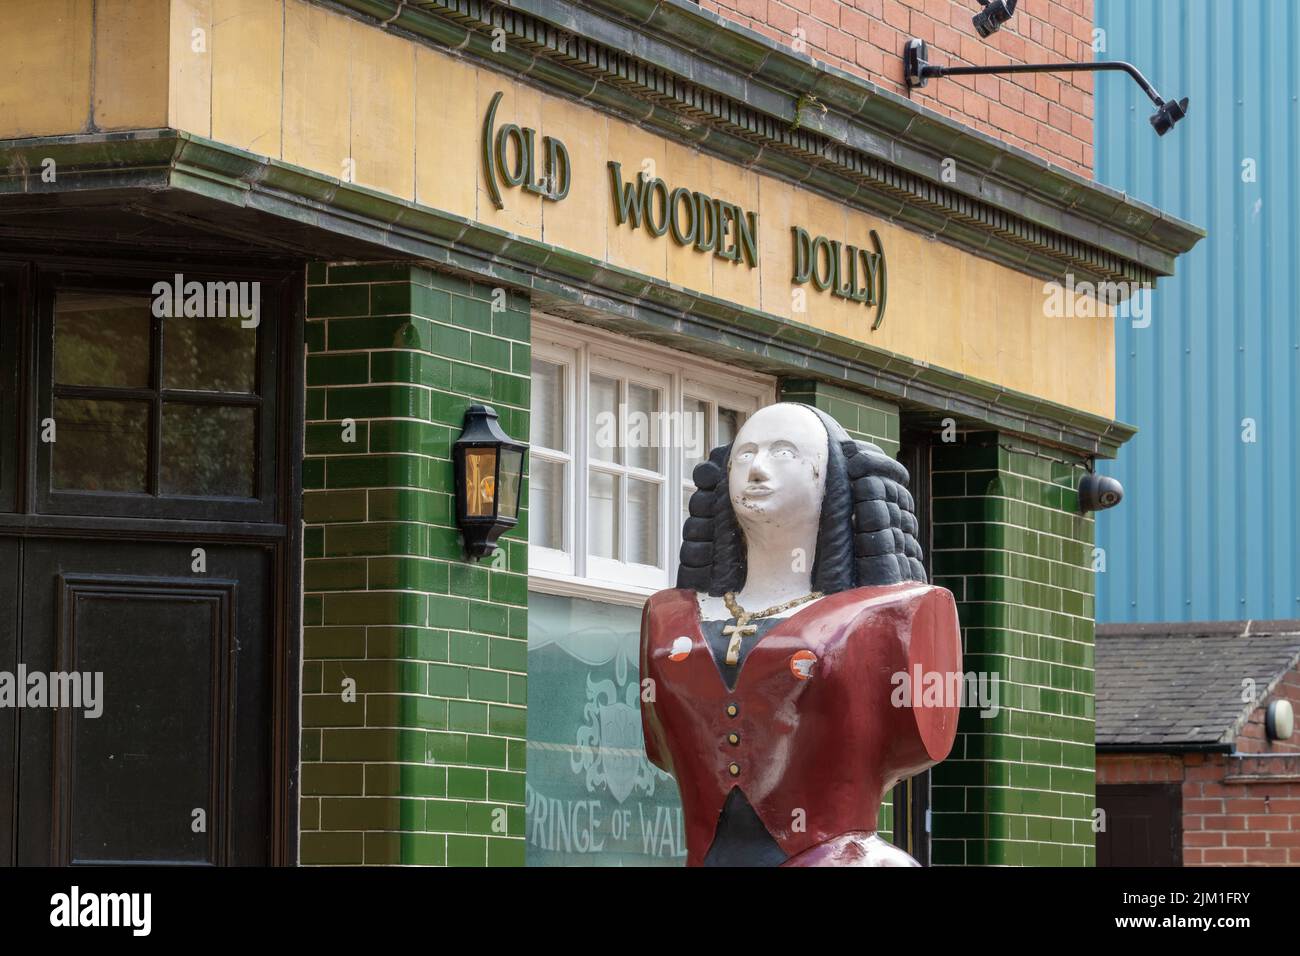 Old ship's mast head of a female figure, outside the Prince of Wales pub, North Shields, UK, also known as the Old Wooden Dolly. Stock Photo